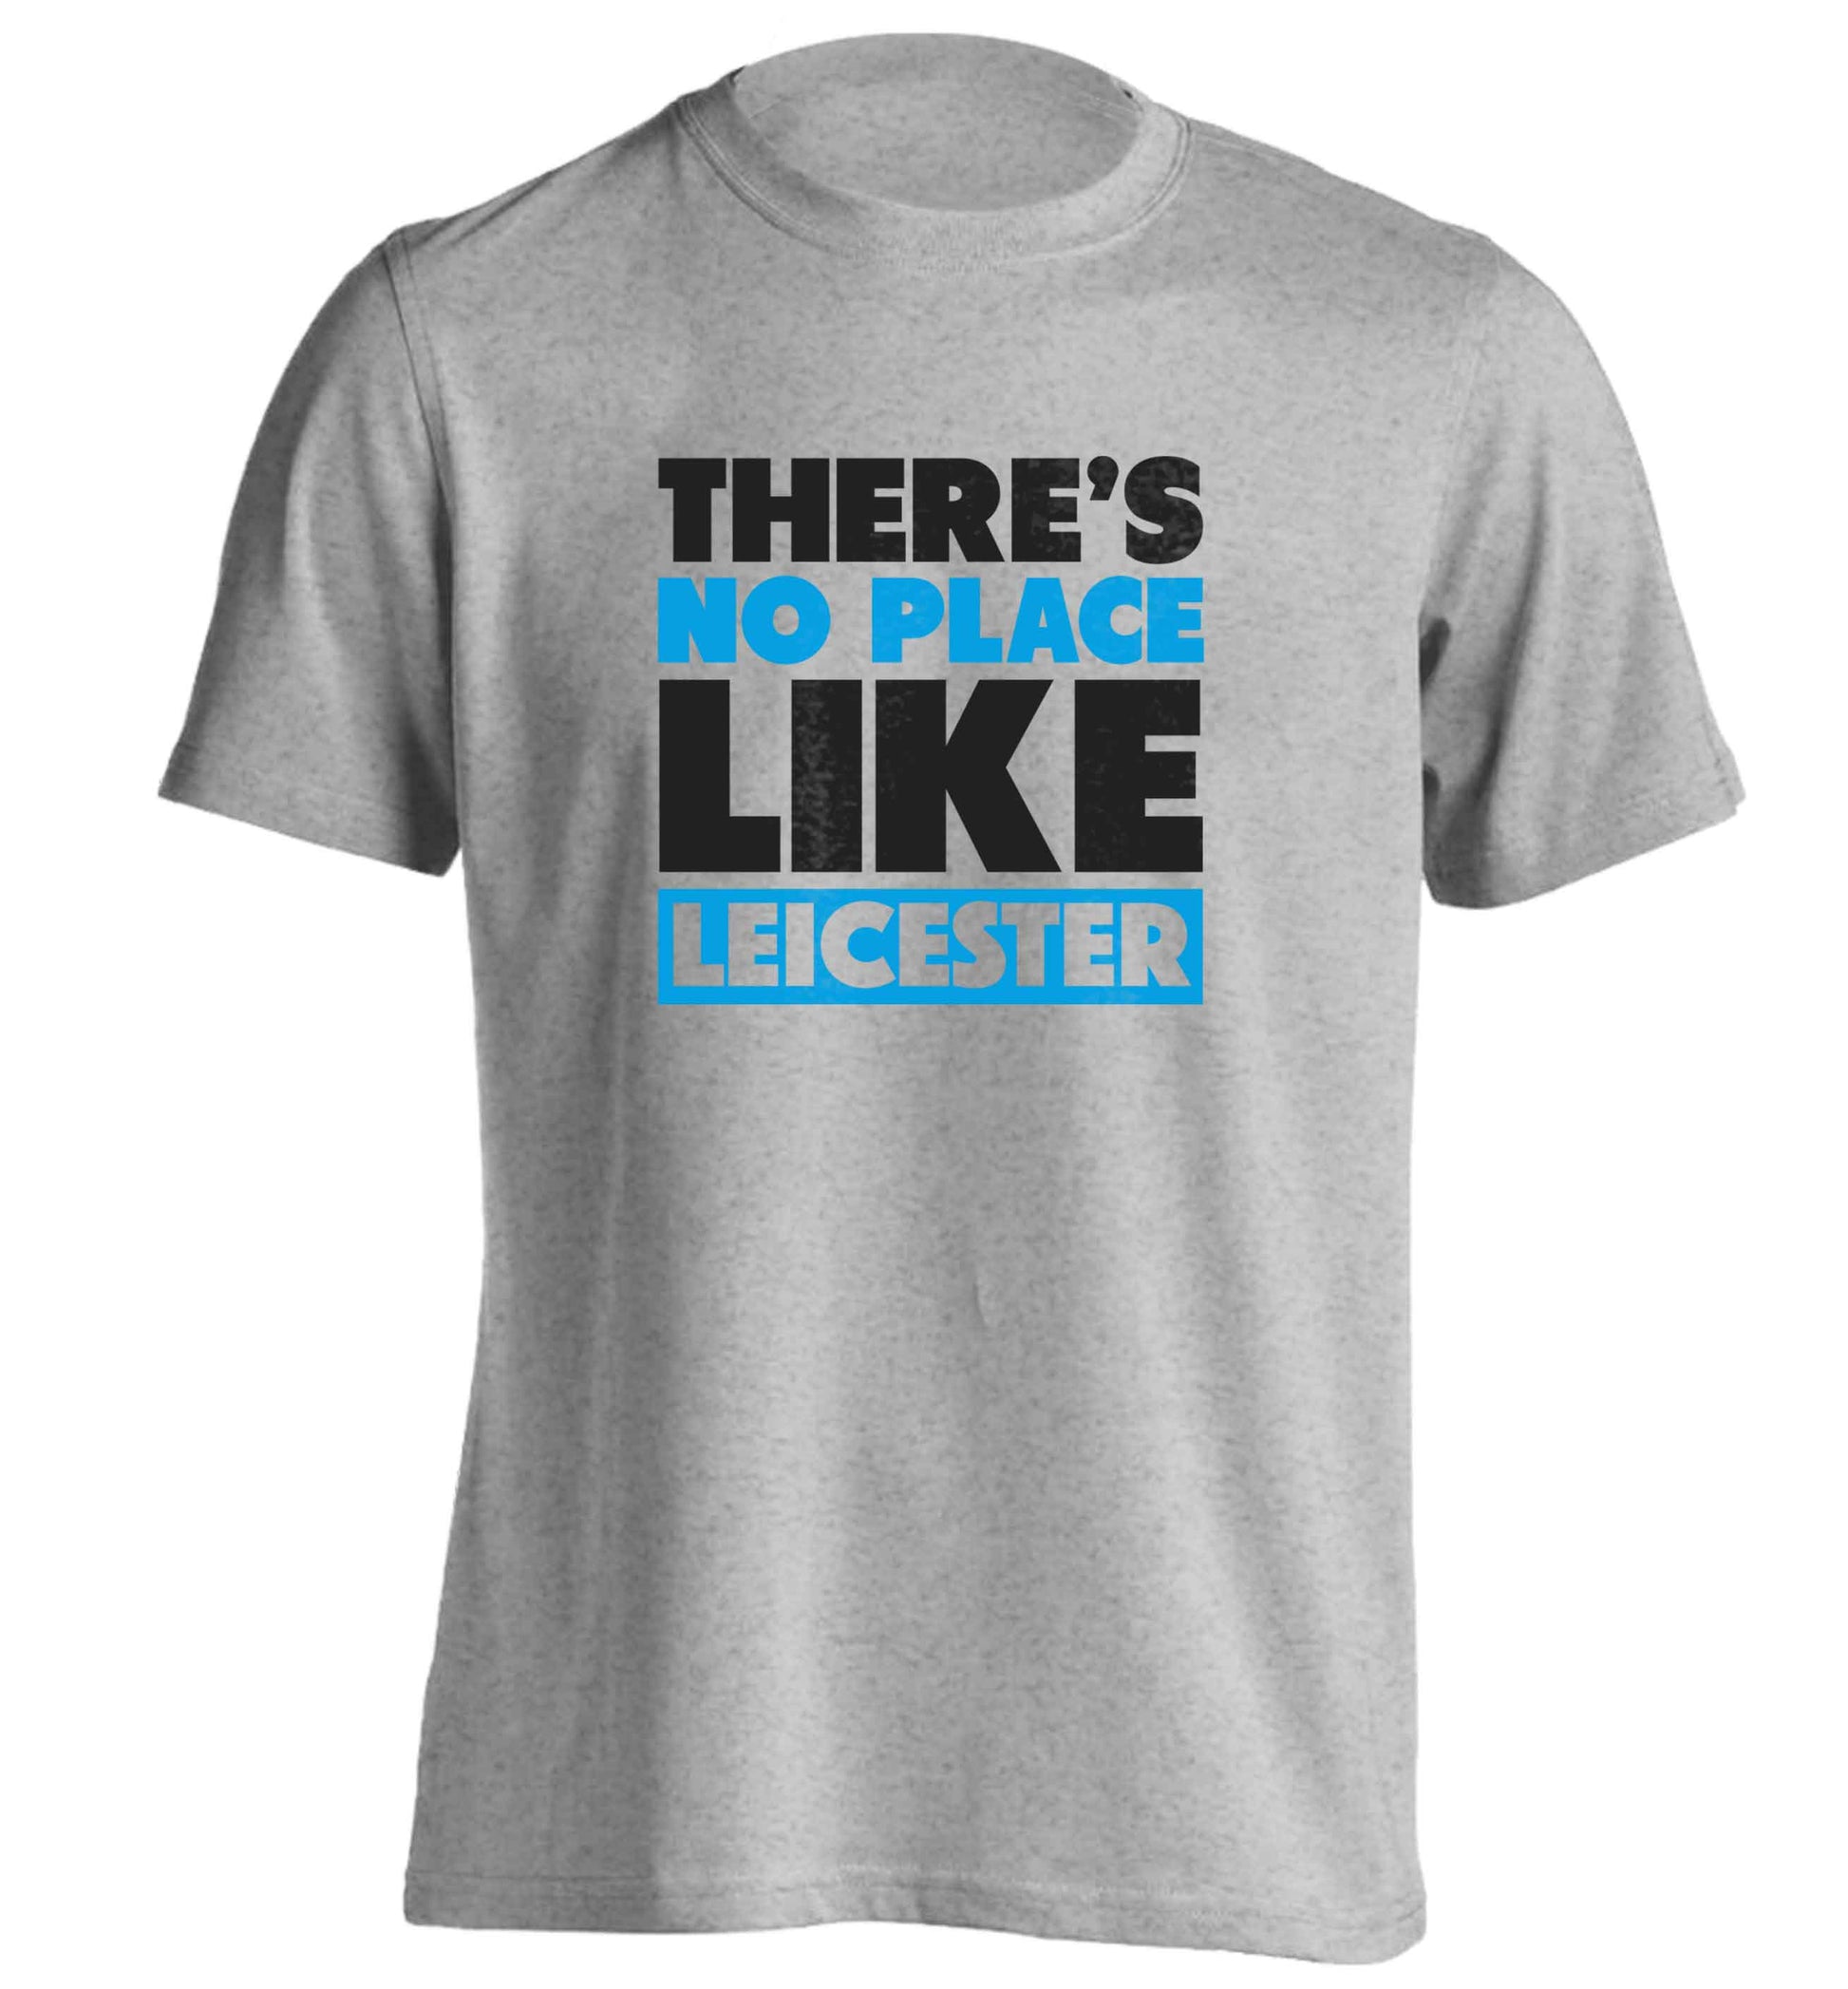 There's no place like Leicester adults unisex grey Tshirt 2XL